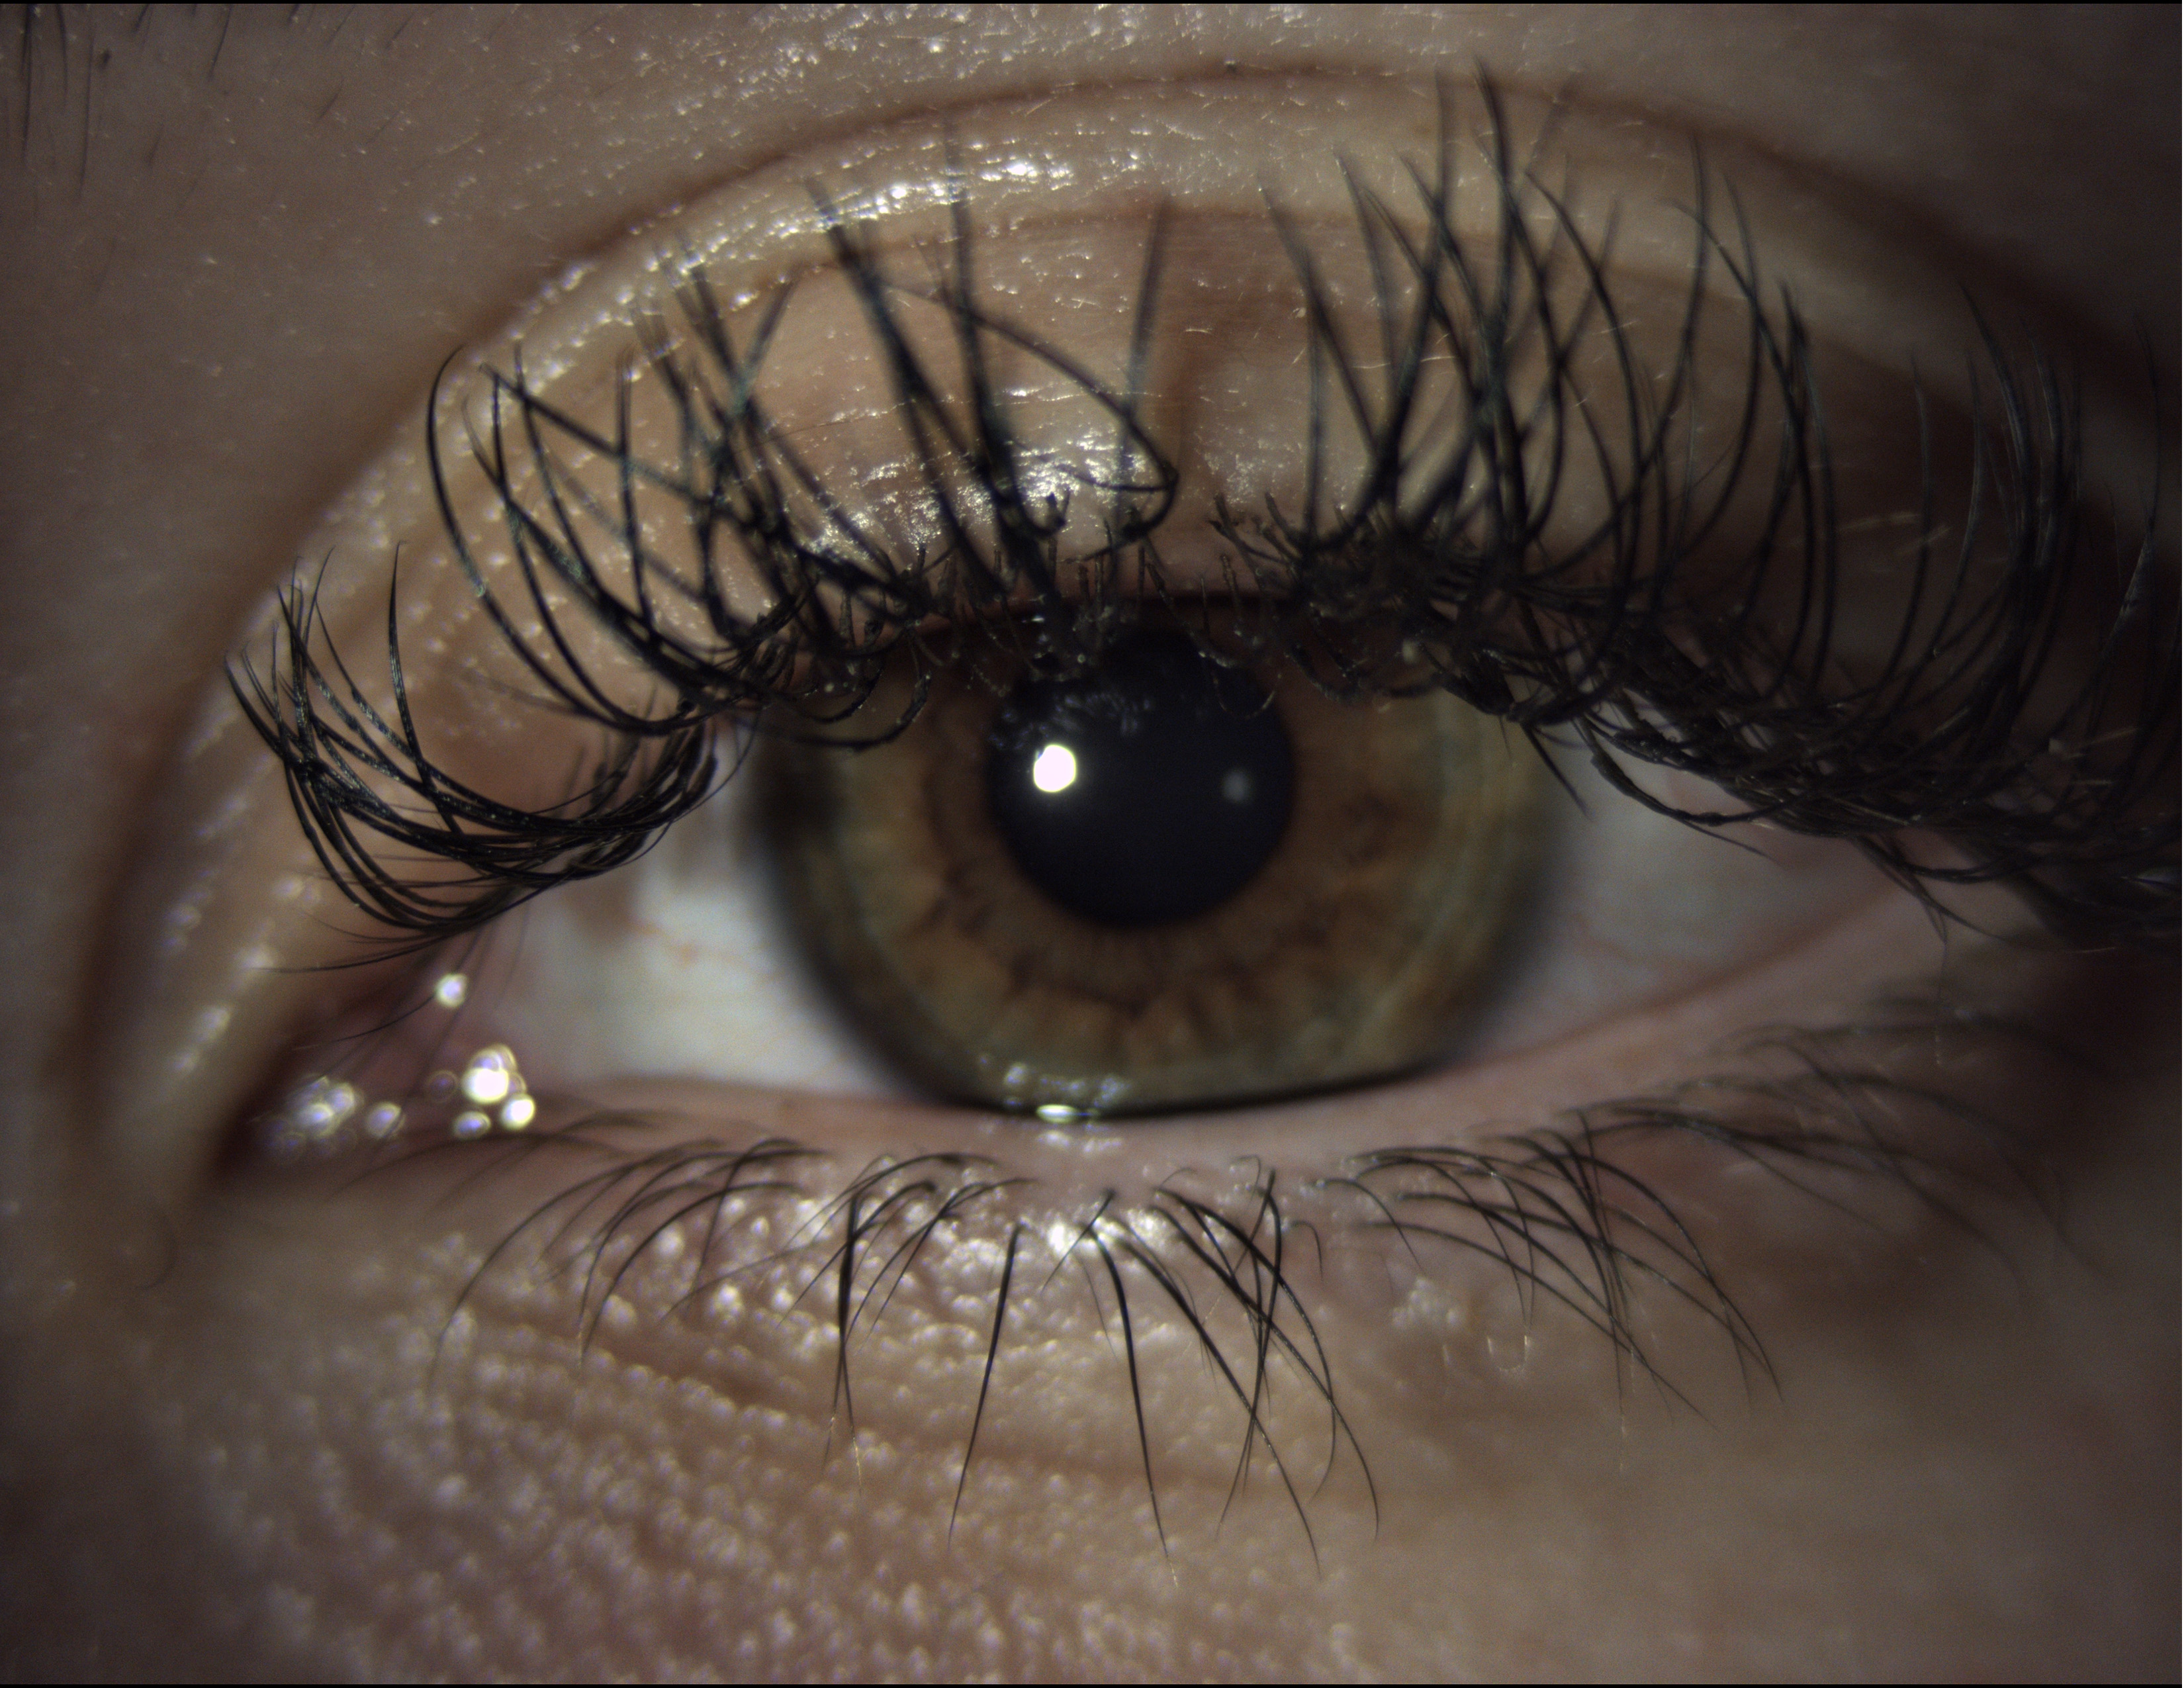 Artificial eyelash extensions: how to balance beauty with health?